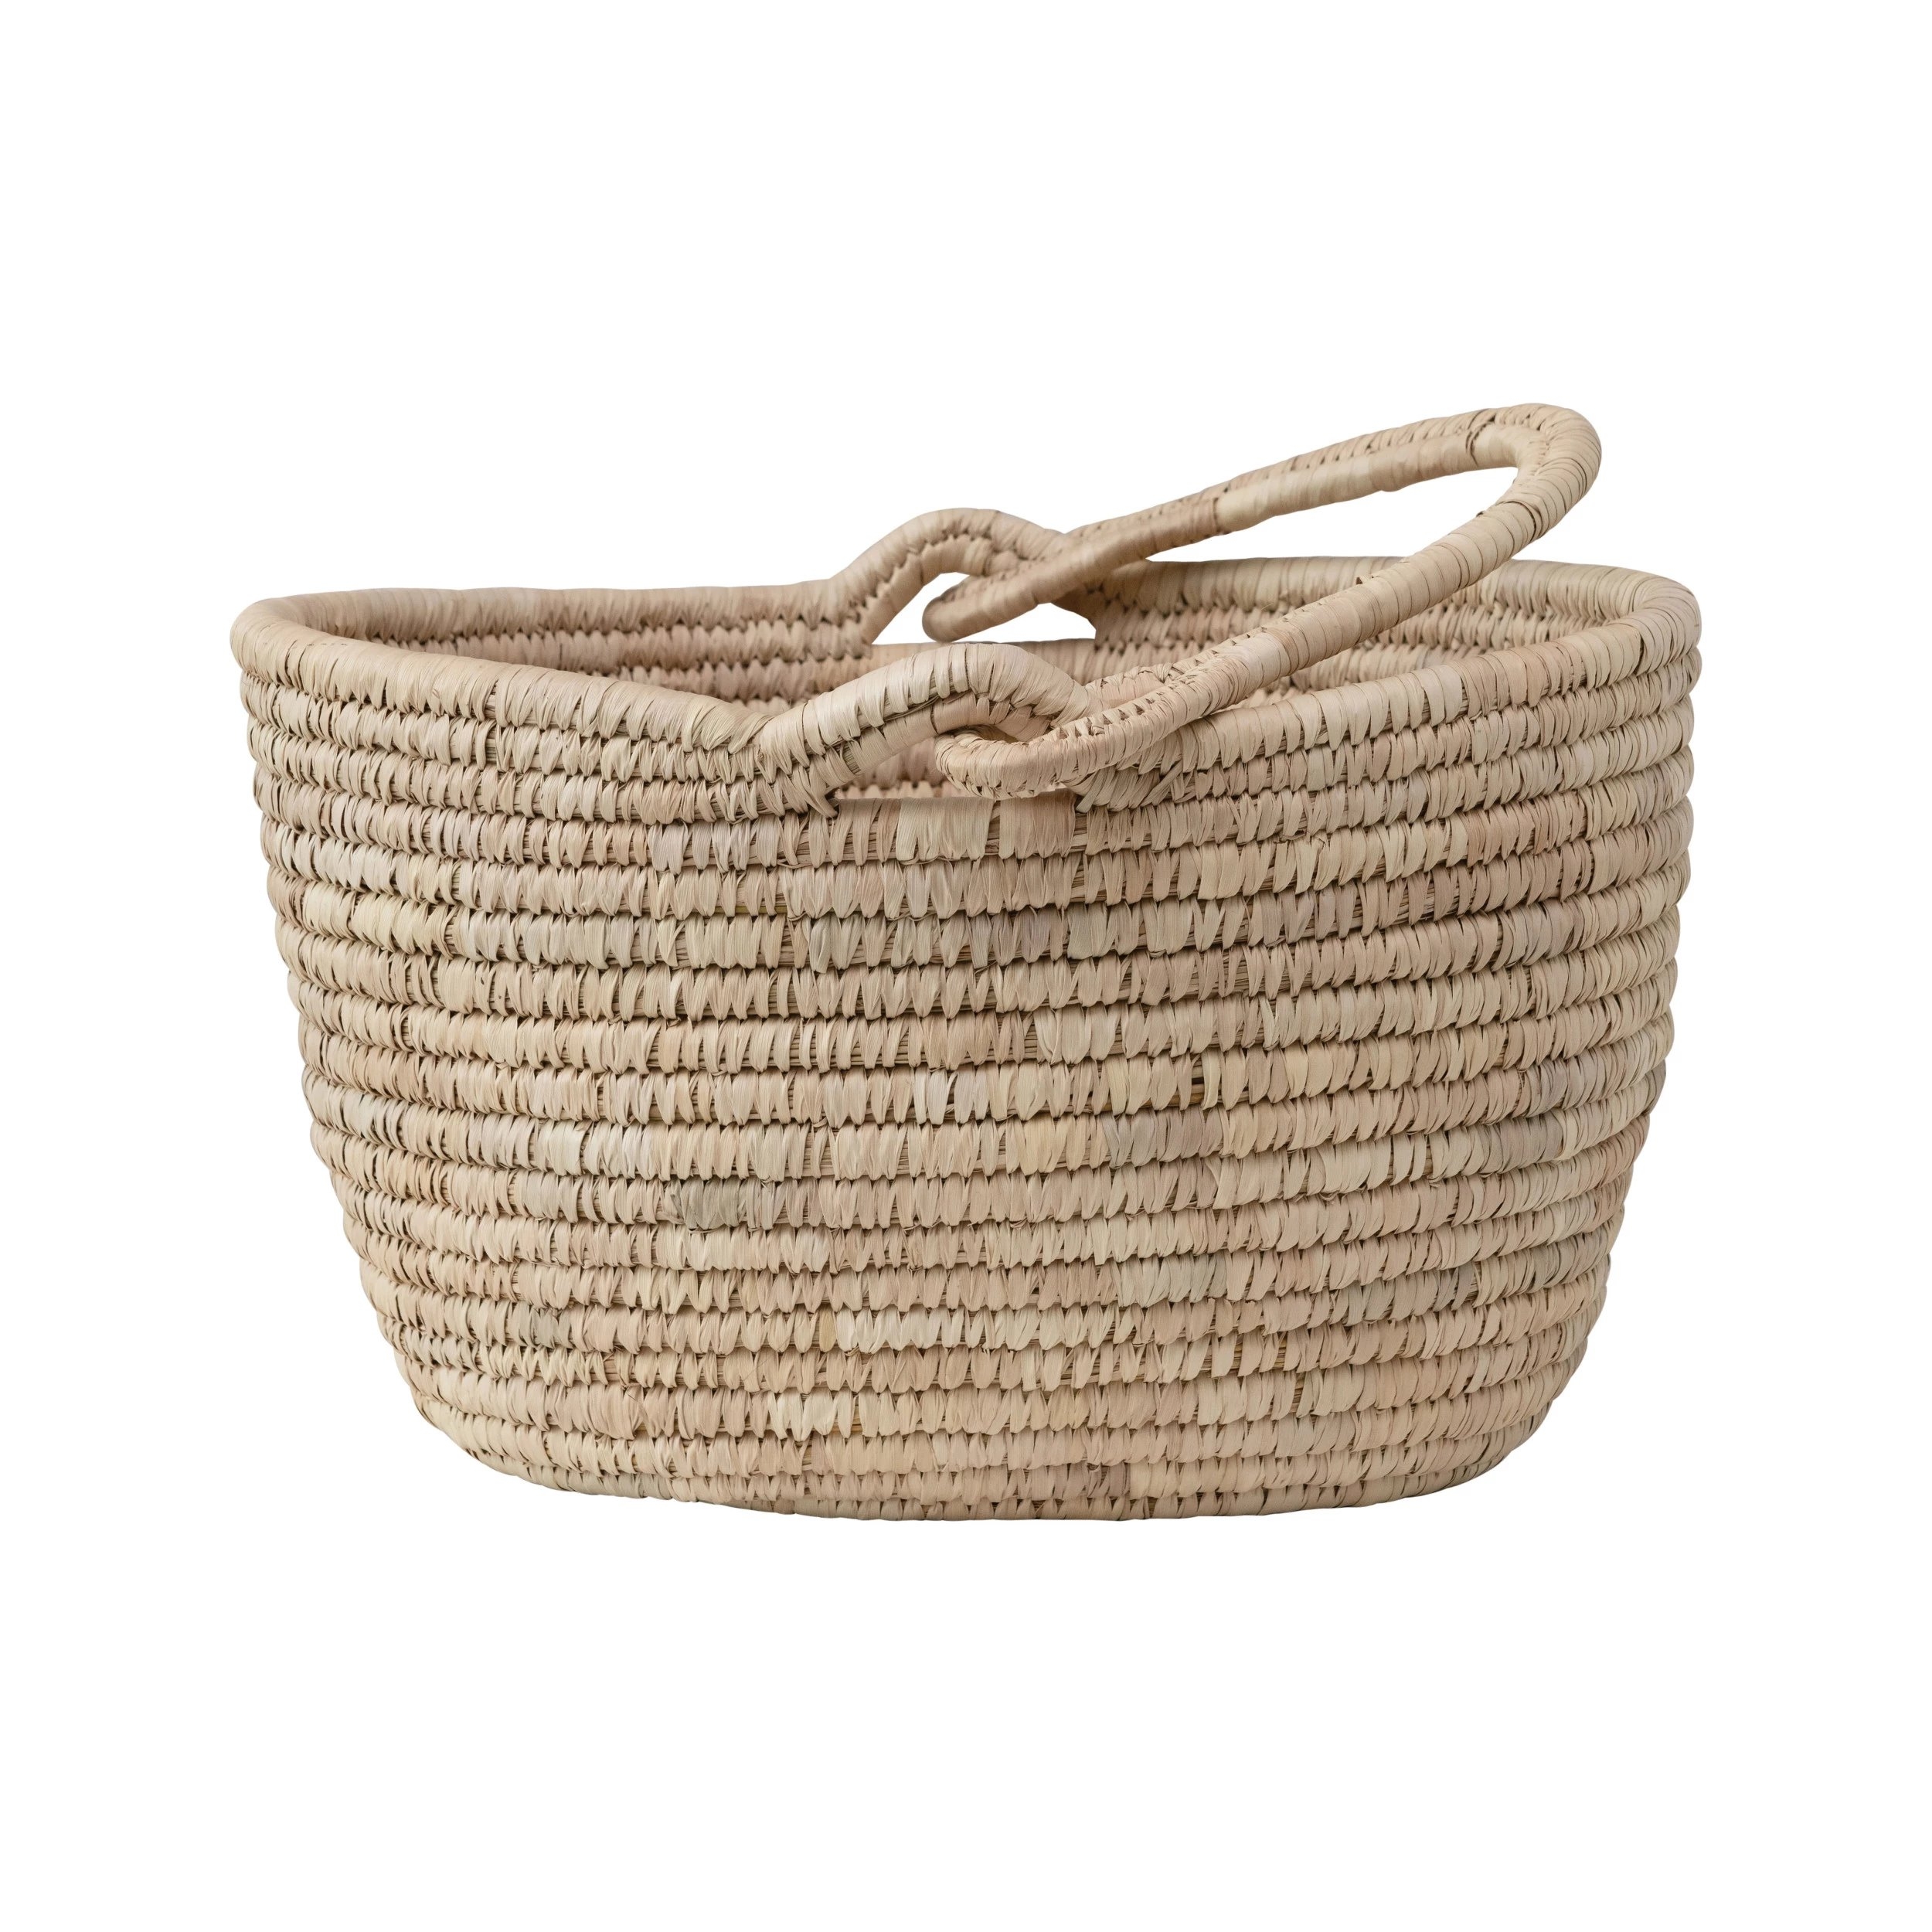 Hand-Woven Grass and Date Leaf Basket with Handle - Image 0